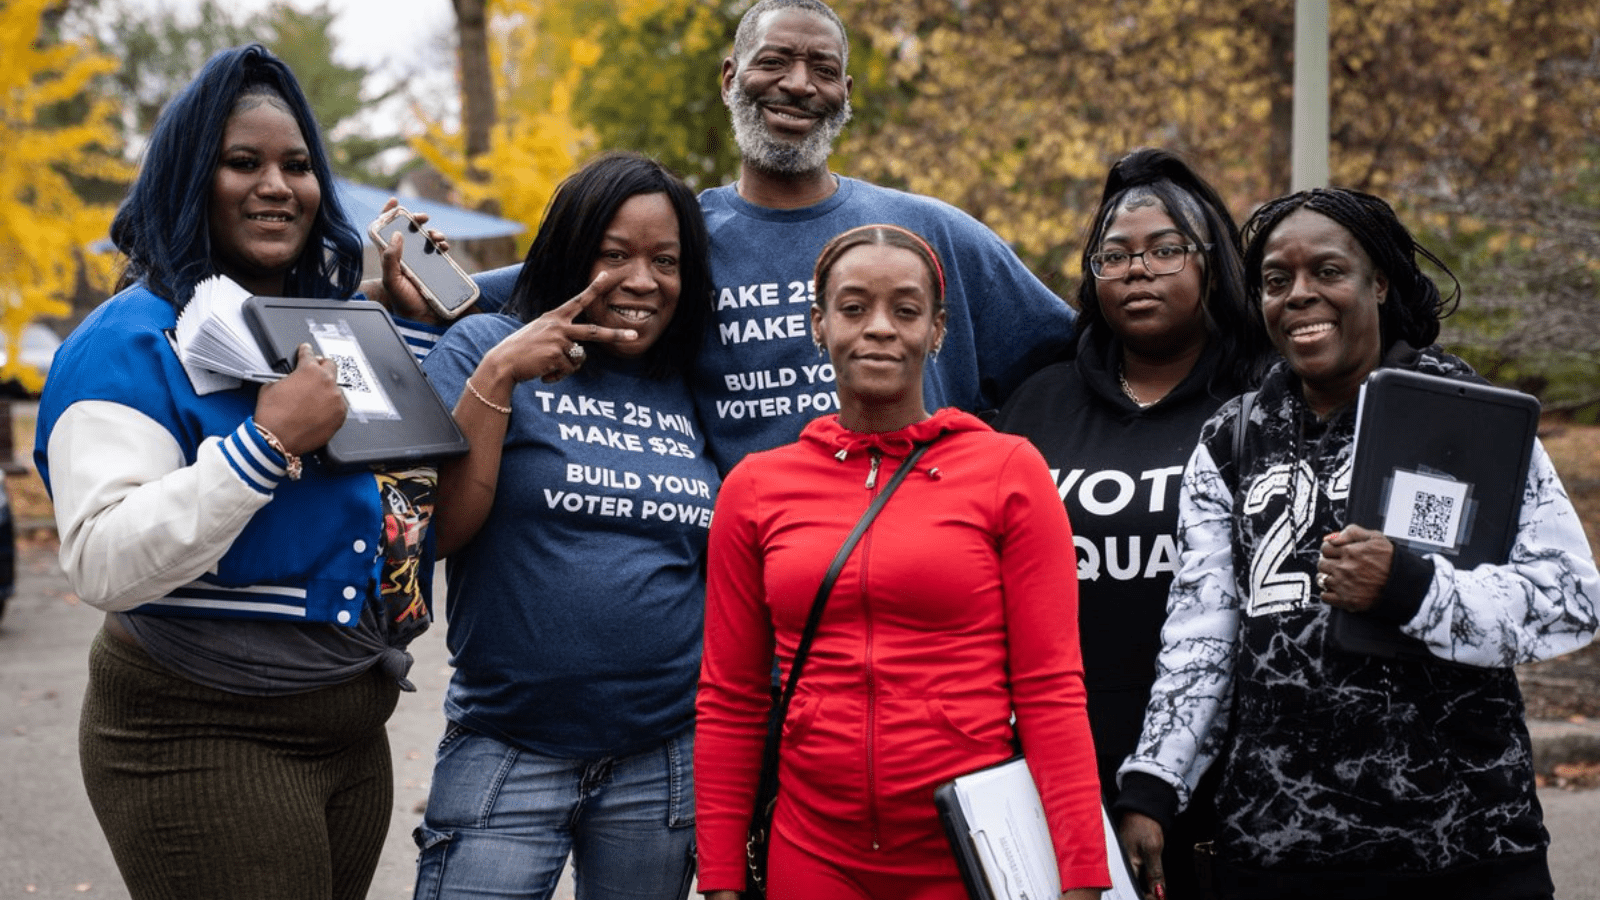 DeLoach Family canvasses in Ohio to encourage community members to vote.